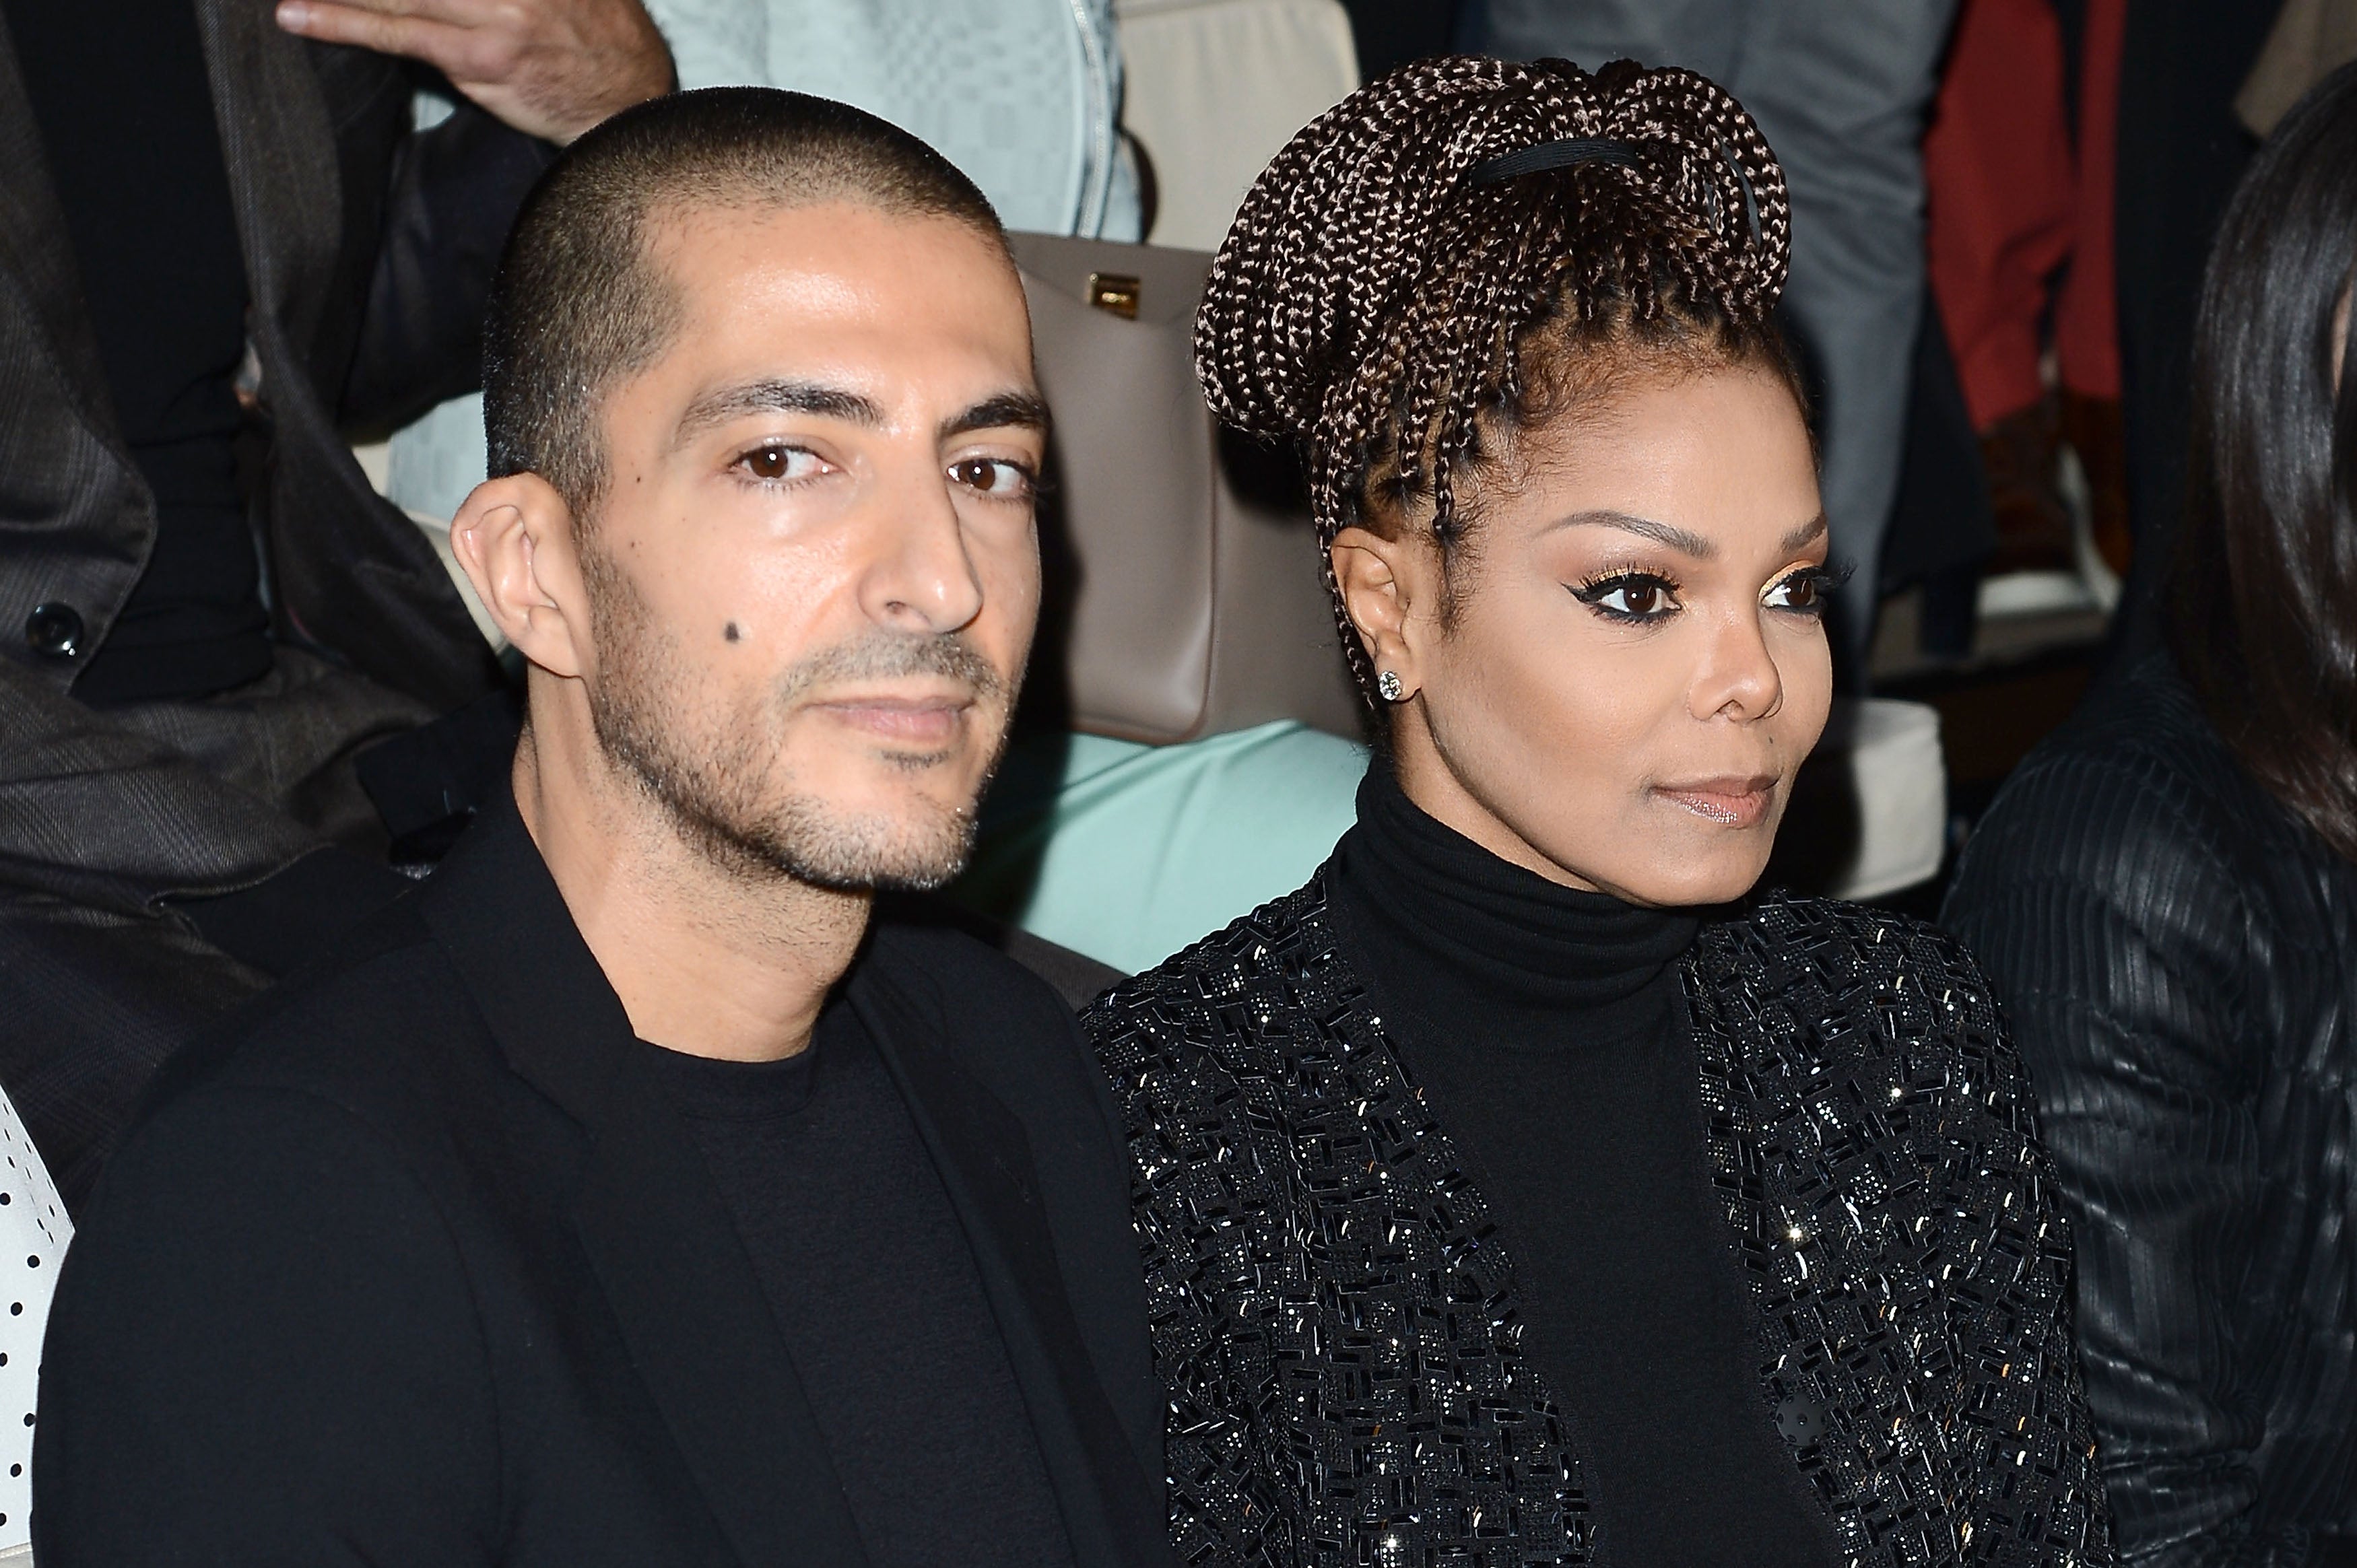 Janet Jackson And Wissam Al Mana Split Shortly After Son's Birth: 'They Come From Very Different Worlds,' Says Source
